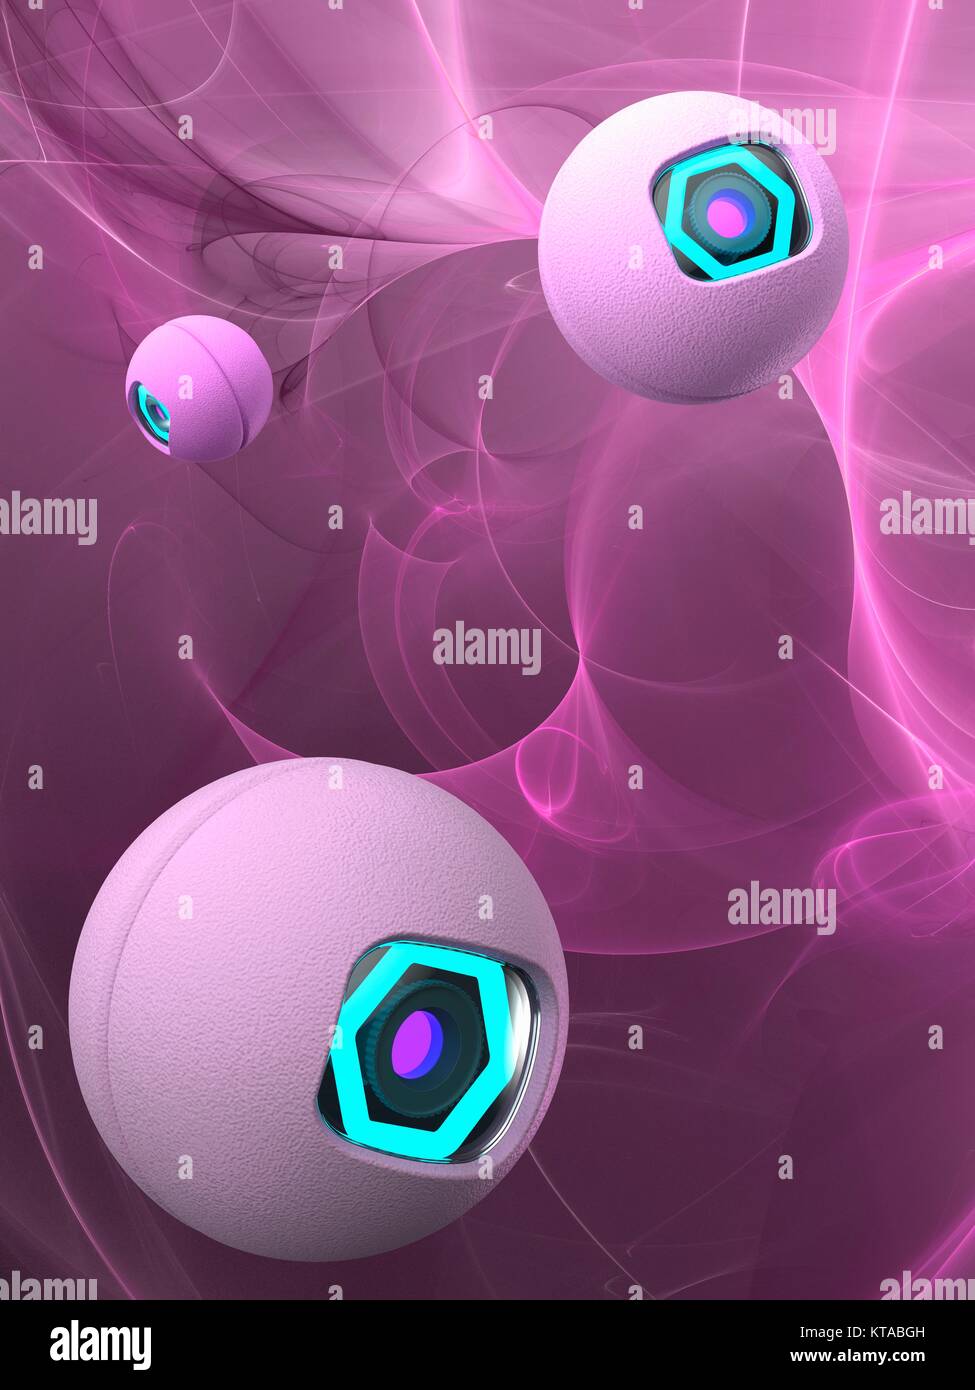 Nanorobots, computer illustration. Conceptual illustration depicting the use of camera-equipped nano-robots in exploring structures of interest. Stock Photo